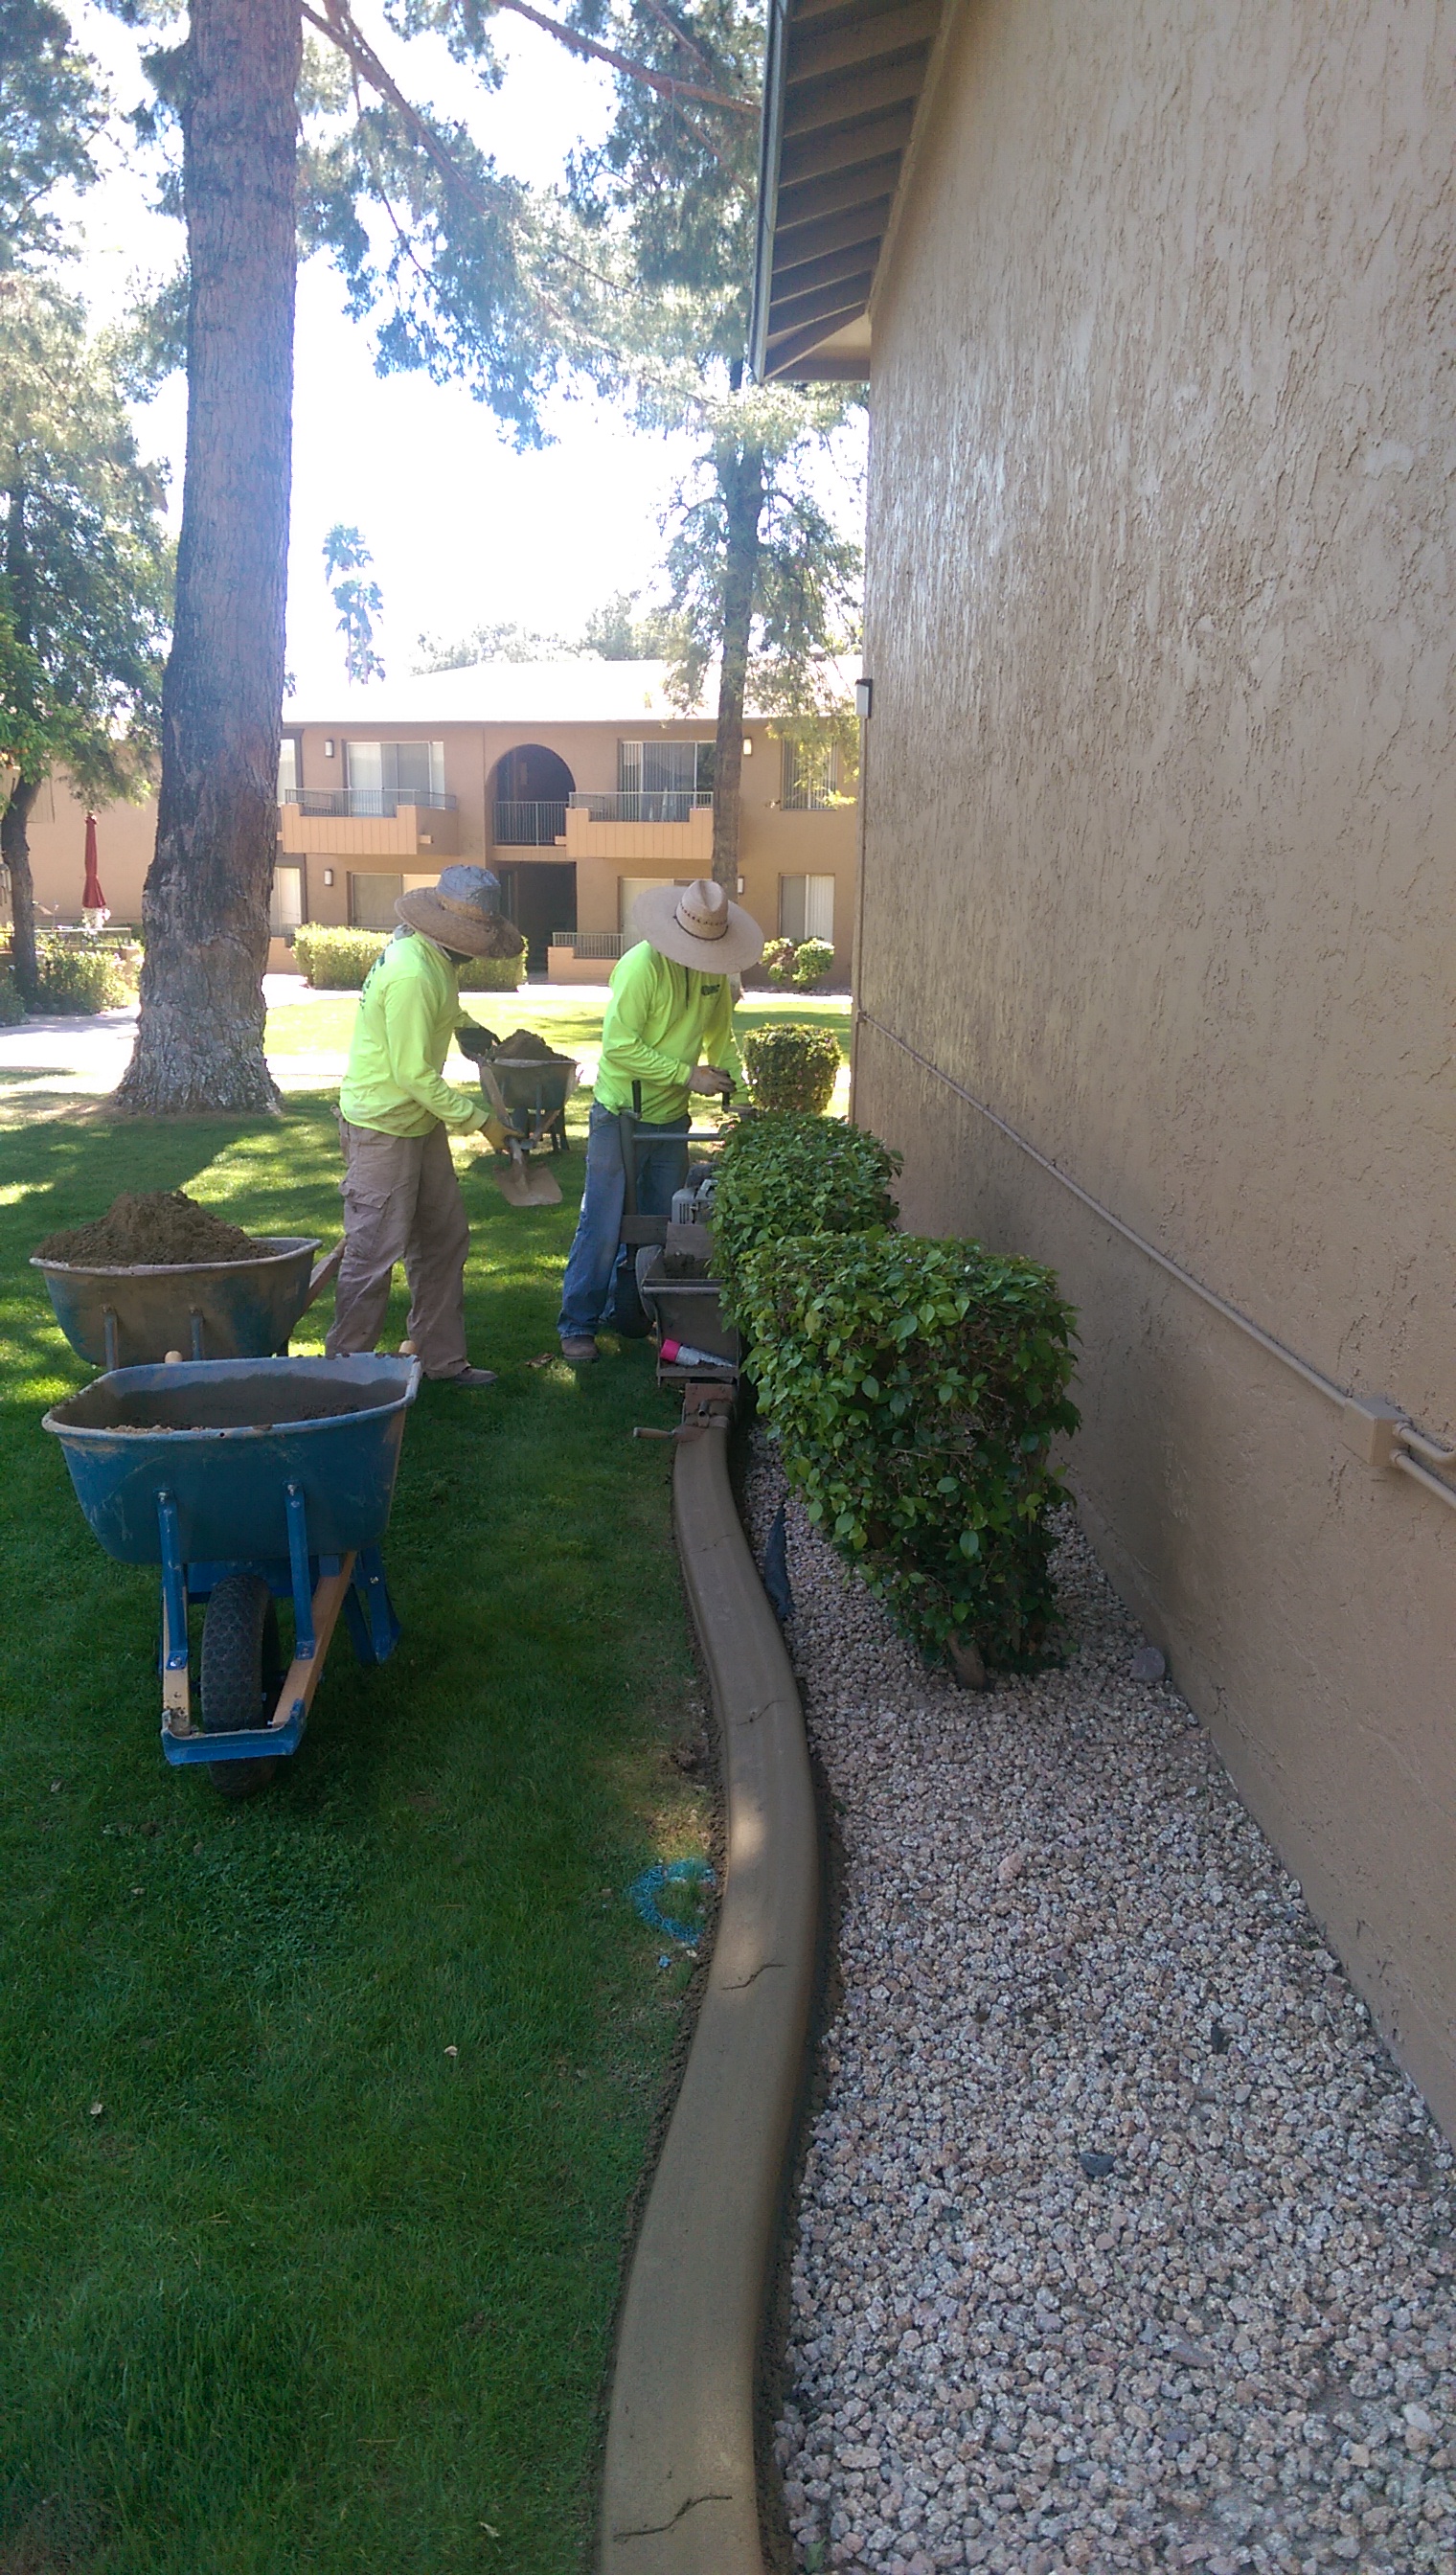 tempe-park-place-curbing-installed